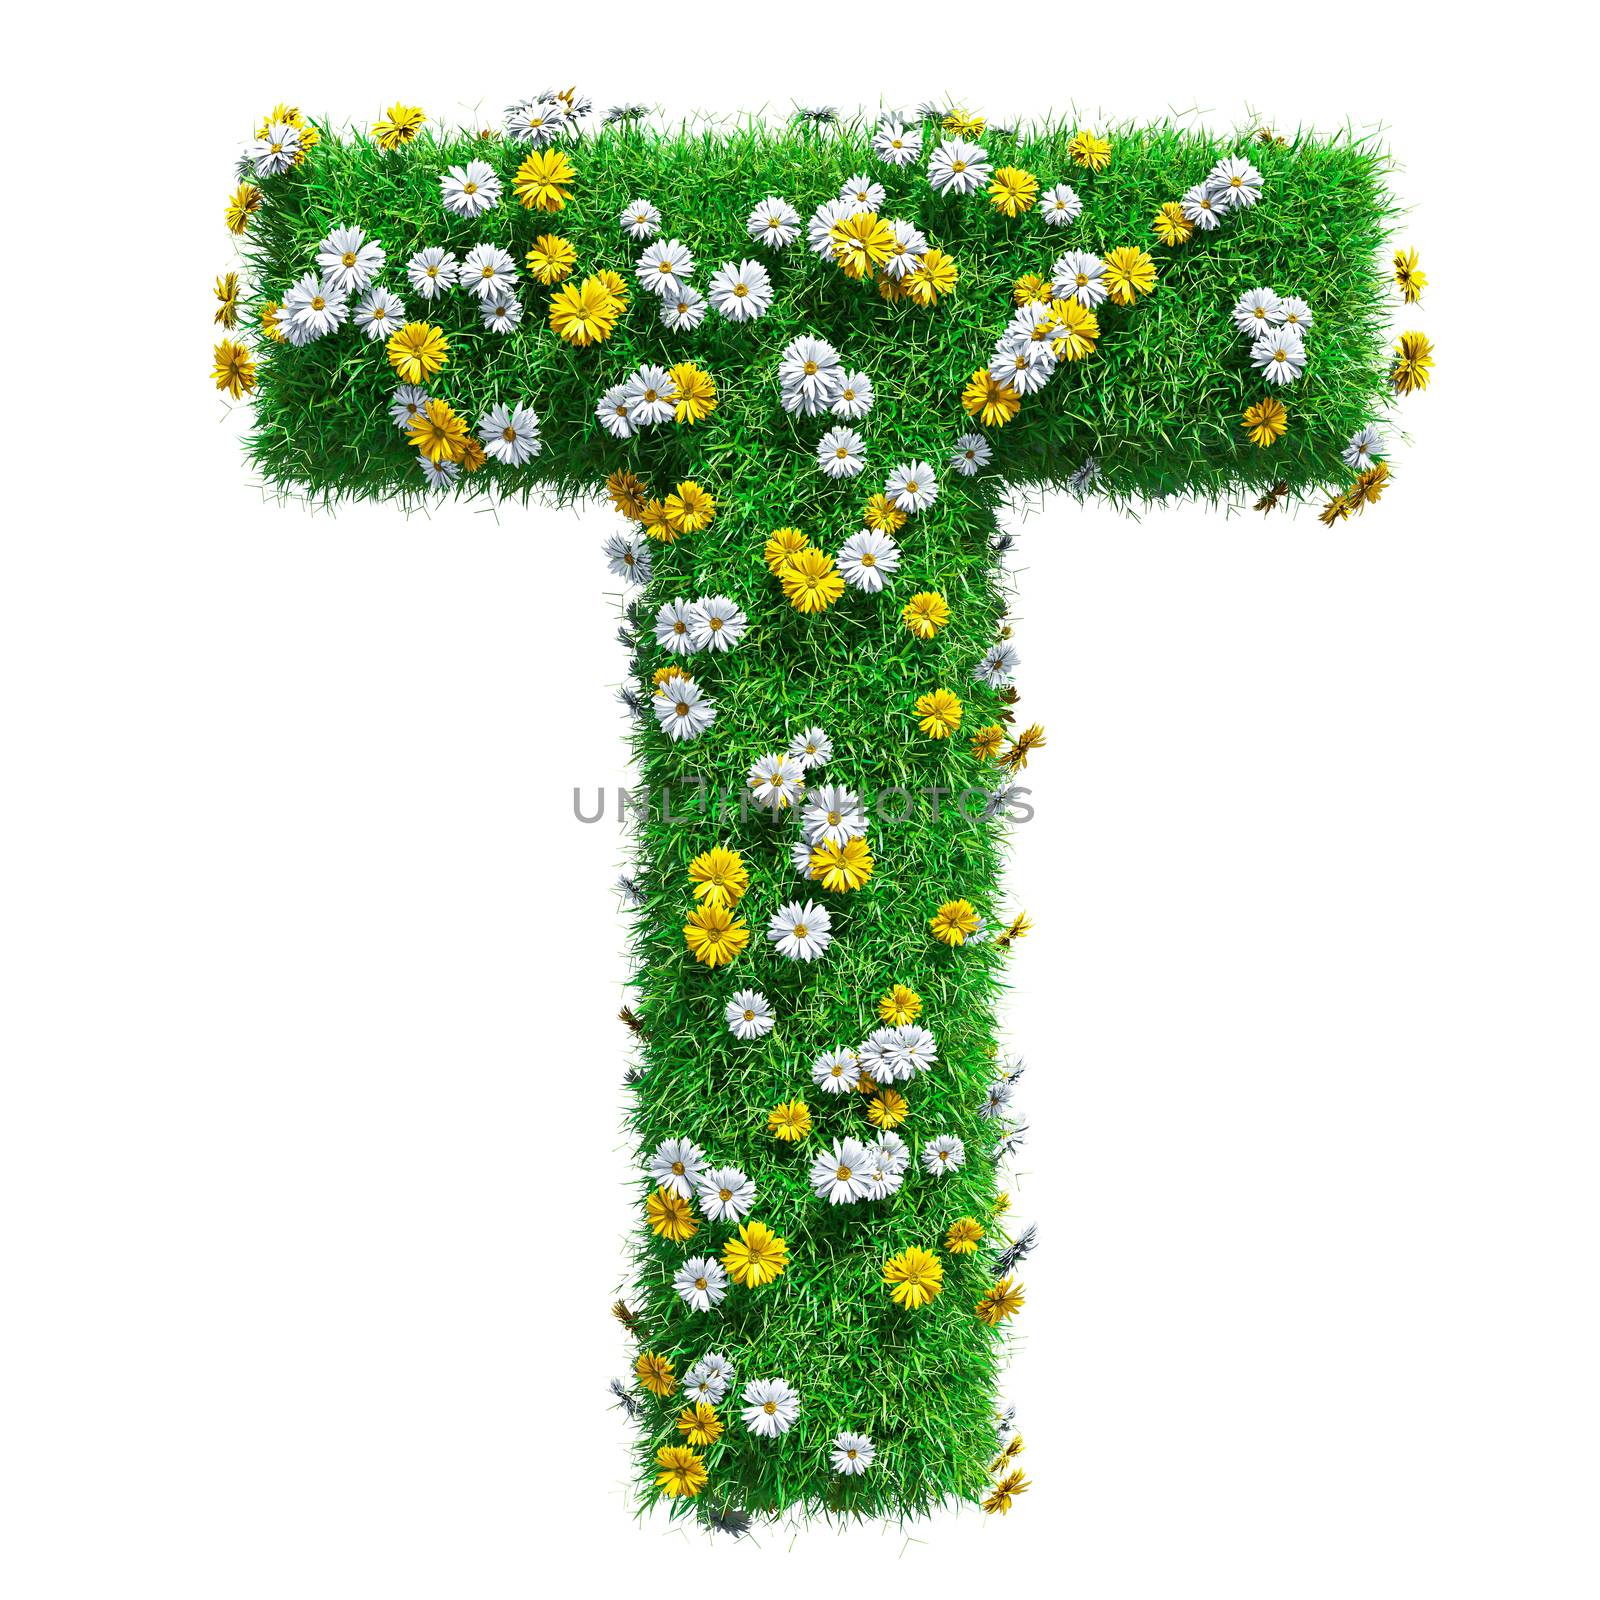 Letter T Of Green Grass And Flowers by cherezoff